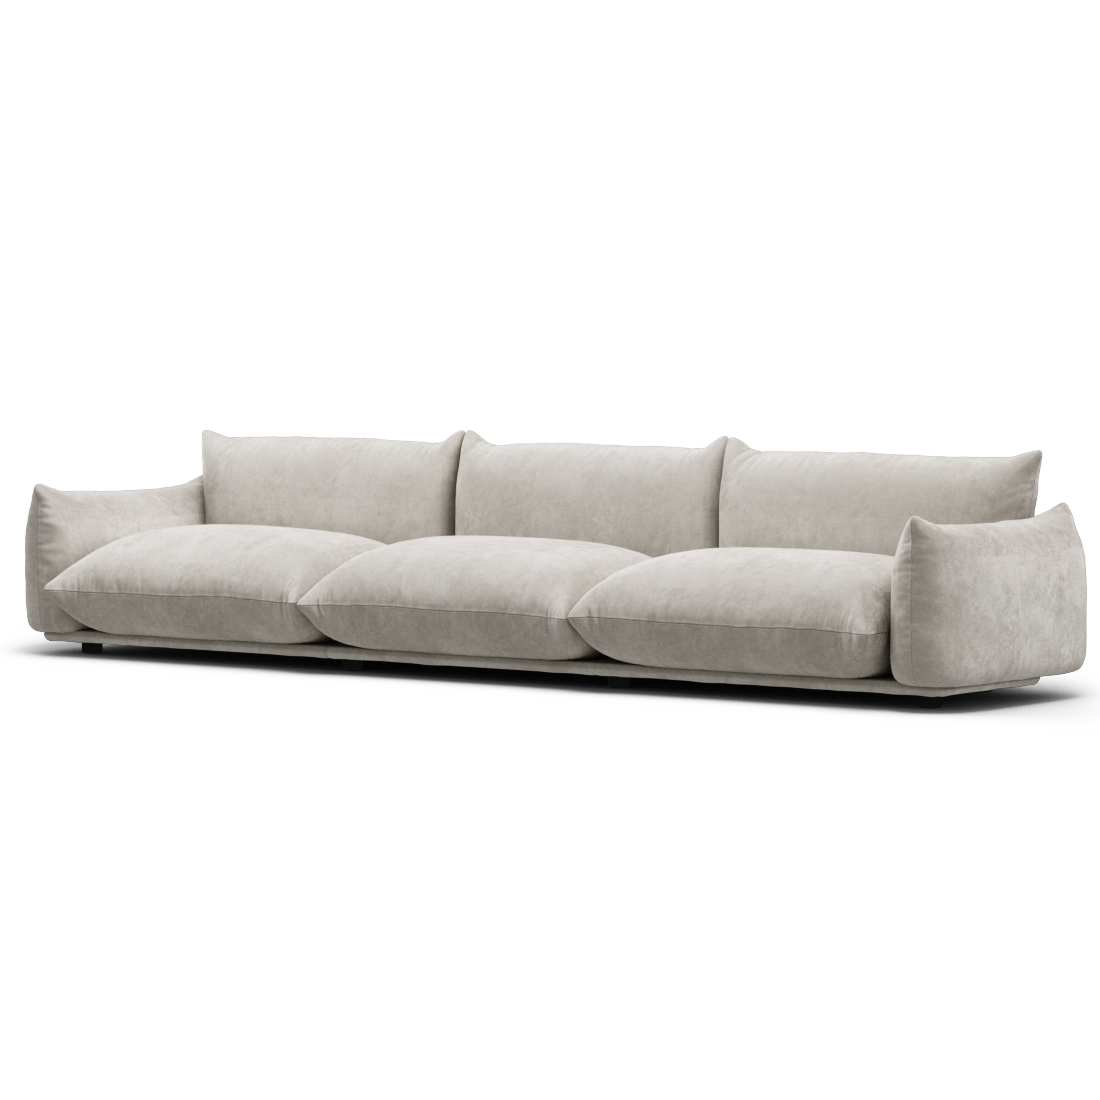 Marenco Sofa / Three Seater Chenille Helios-Feathered Beige Grey